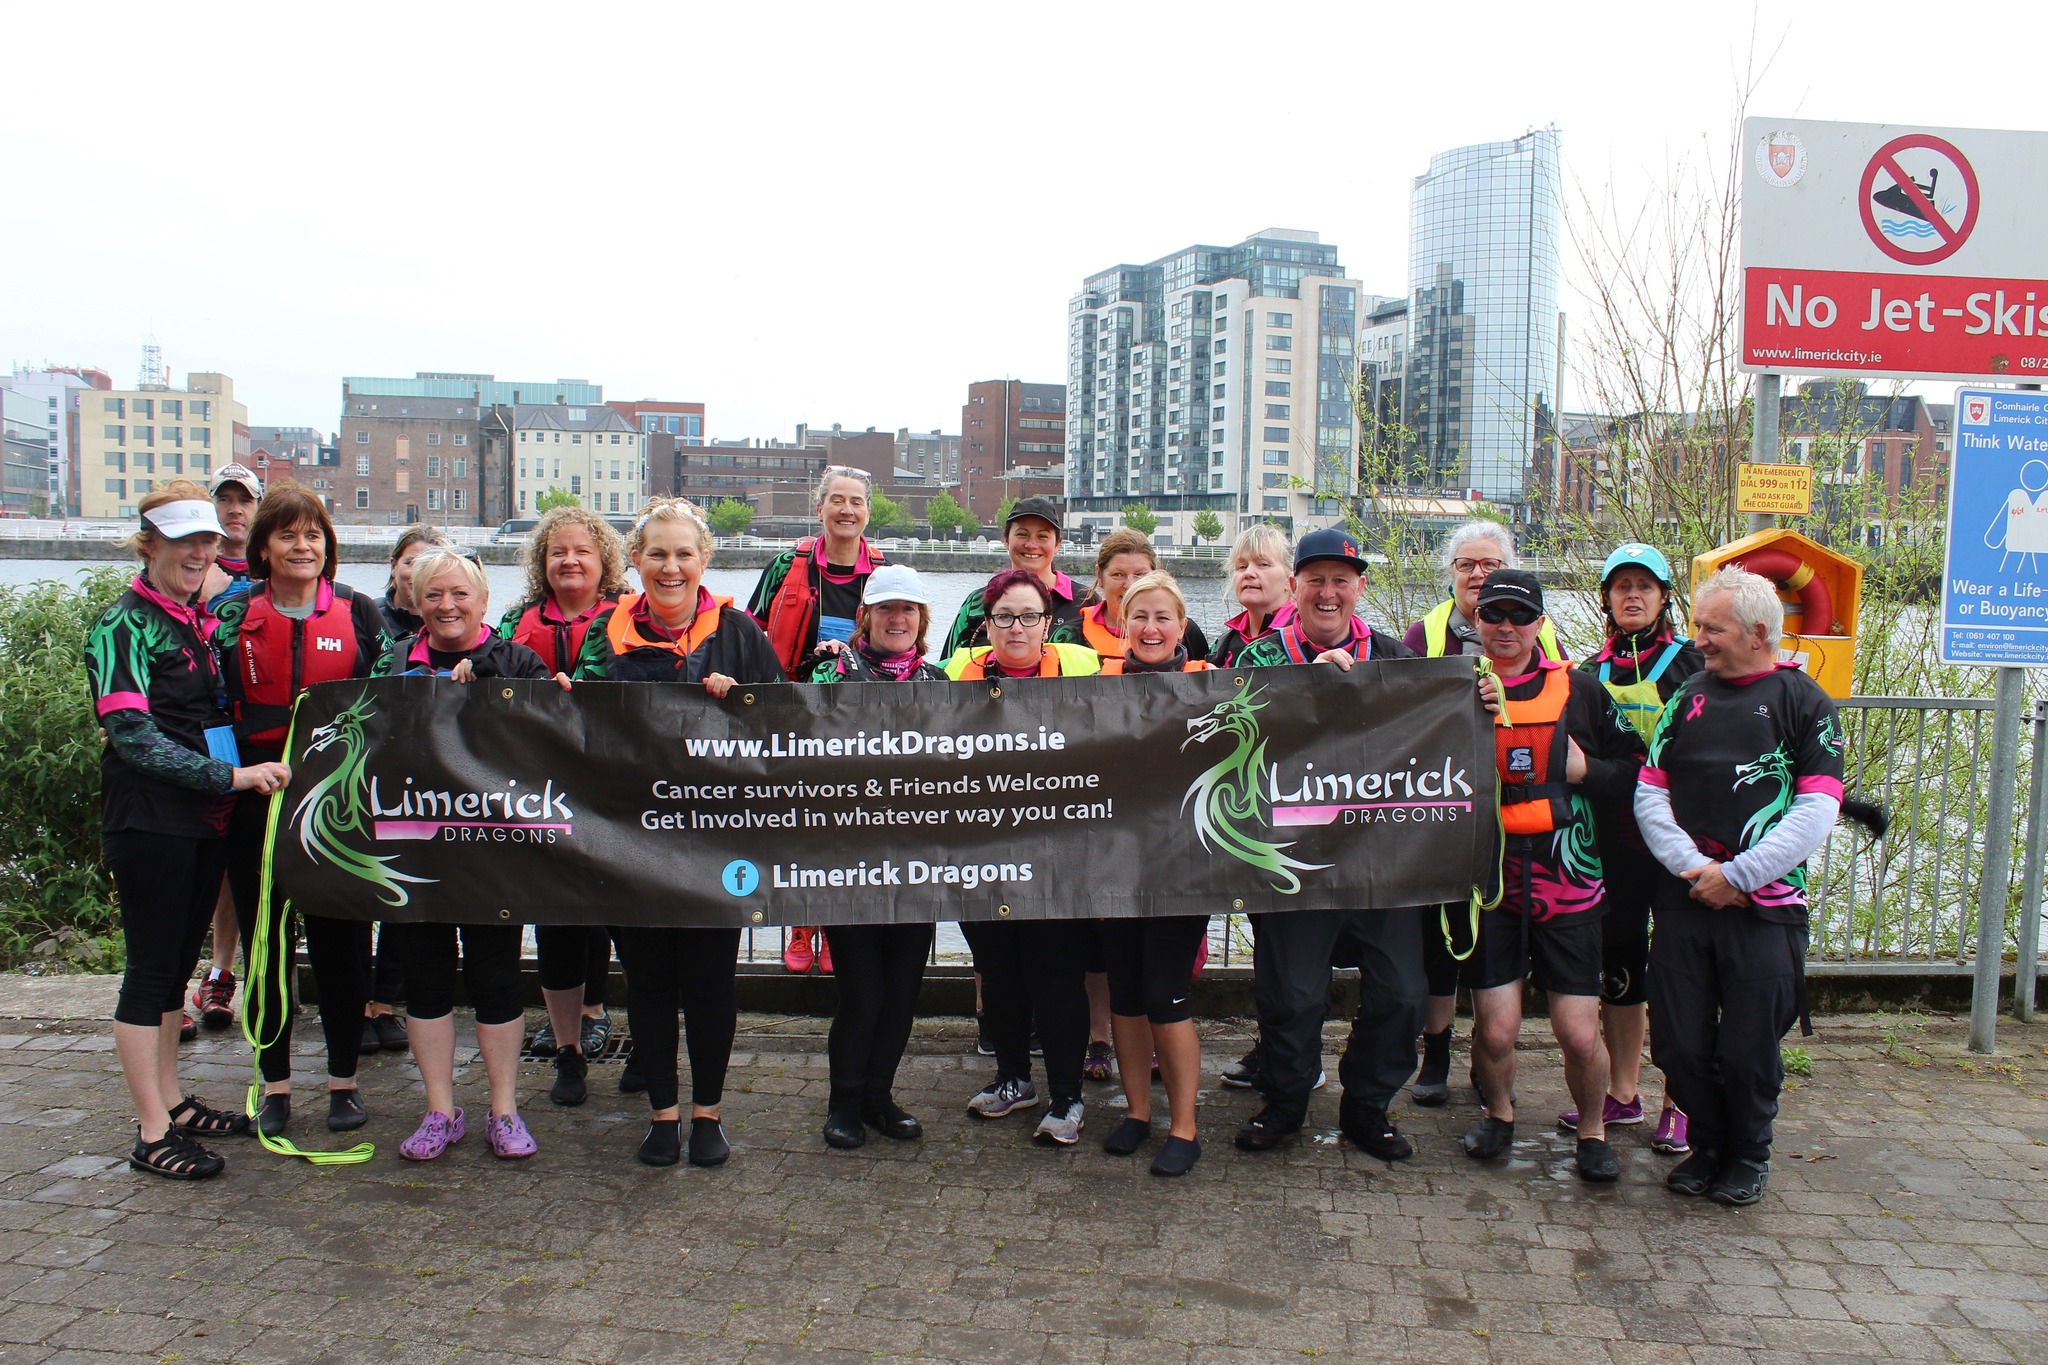 Limerick Dragons Charity Paddle takes place Saturday, August 6th in support of Limerick Kayaking Academy’s Annual Charity Paddle for the Mid-West Rape Crisis Centre